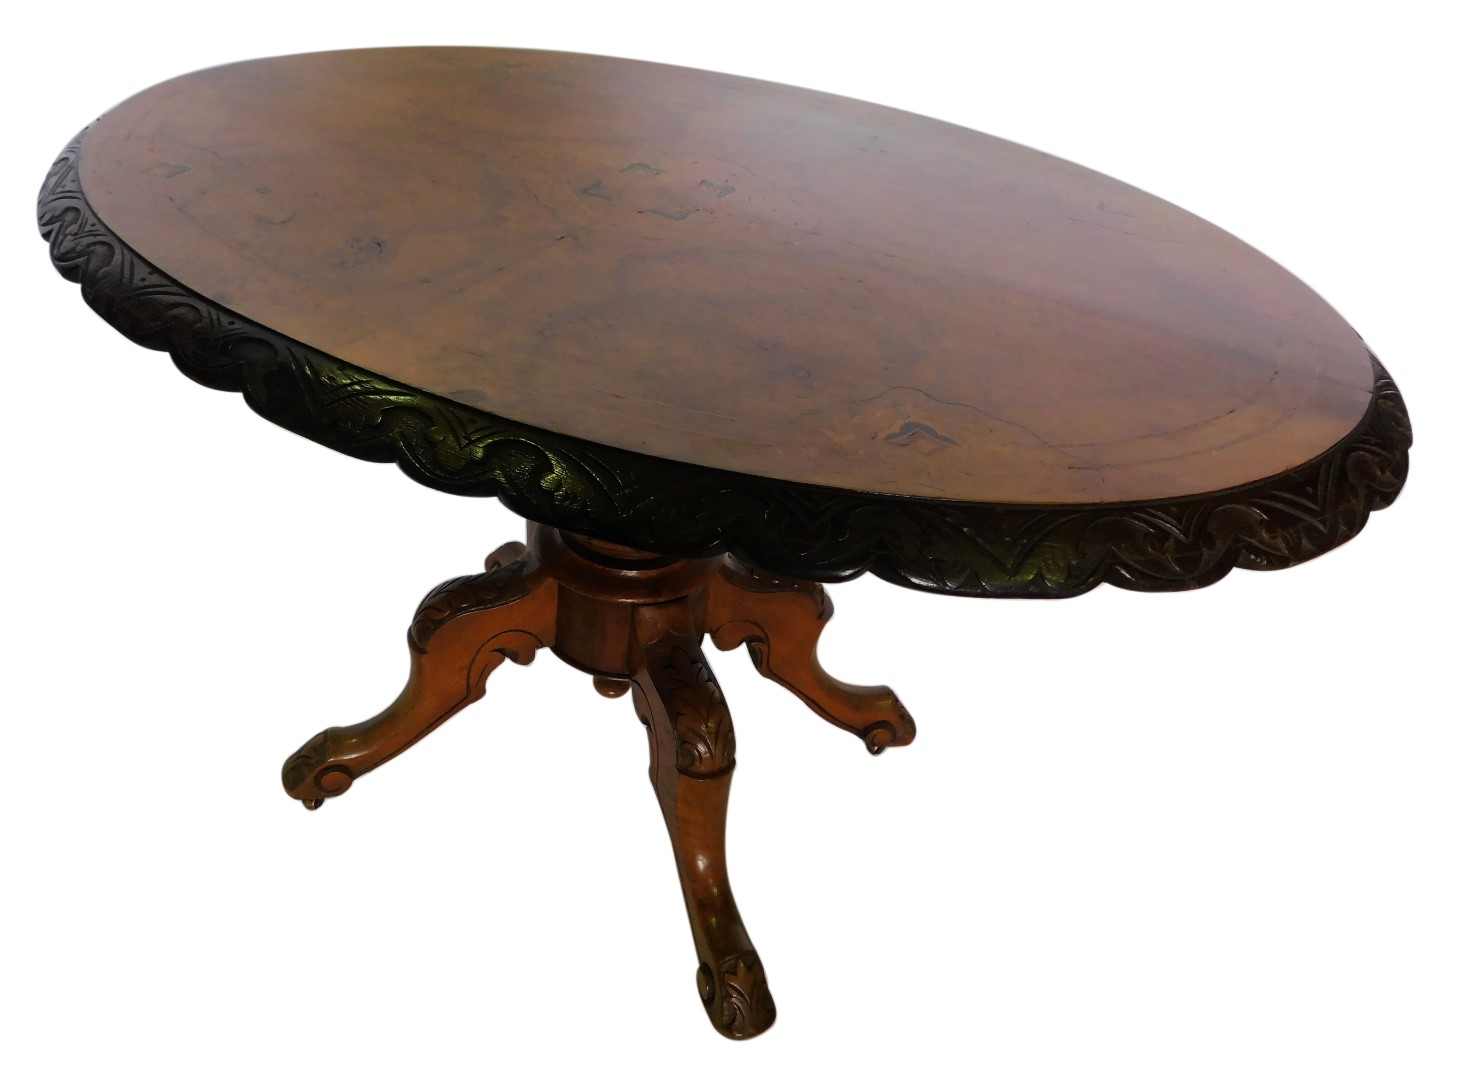 A Victorian walnut and marquetry oval loo table, the top with a carved shaped border, on a turned co